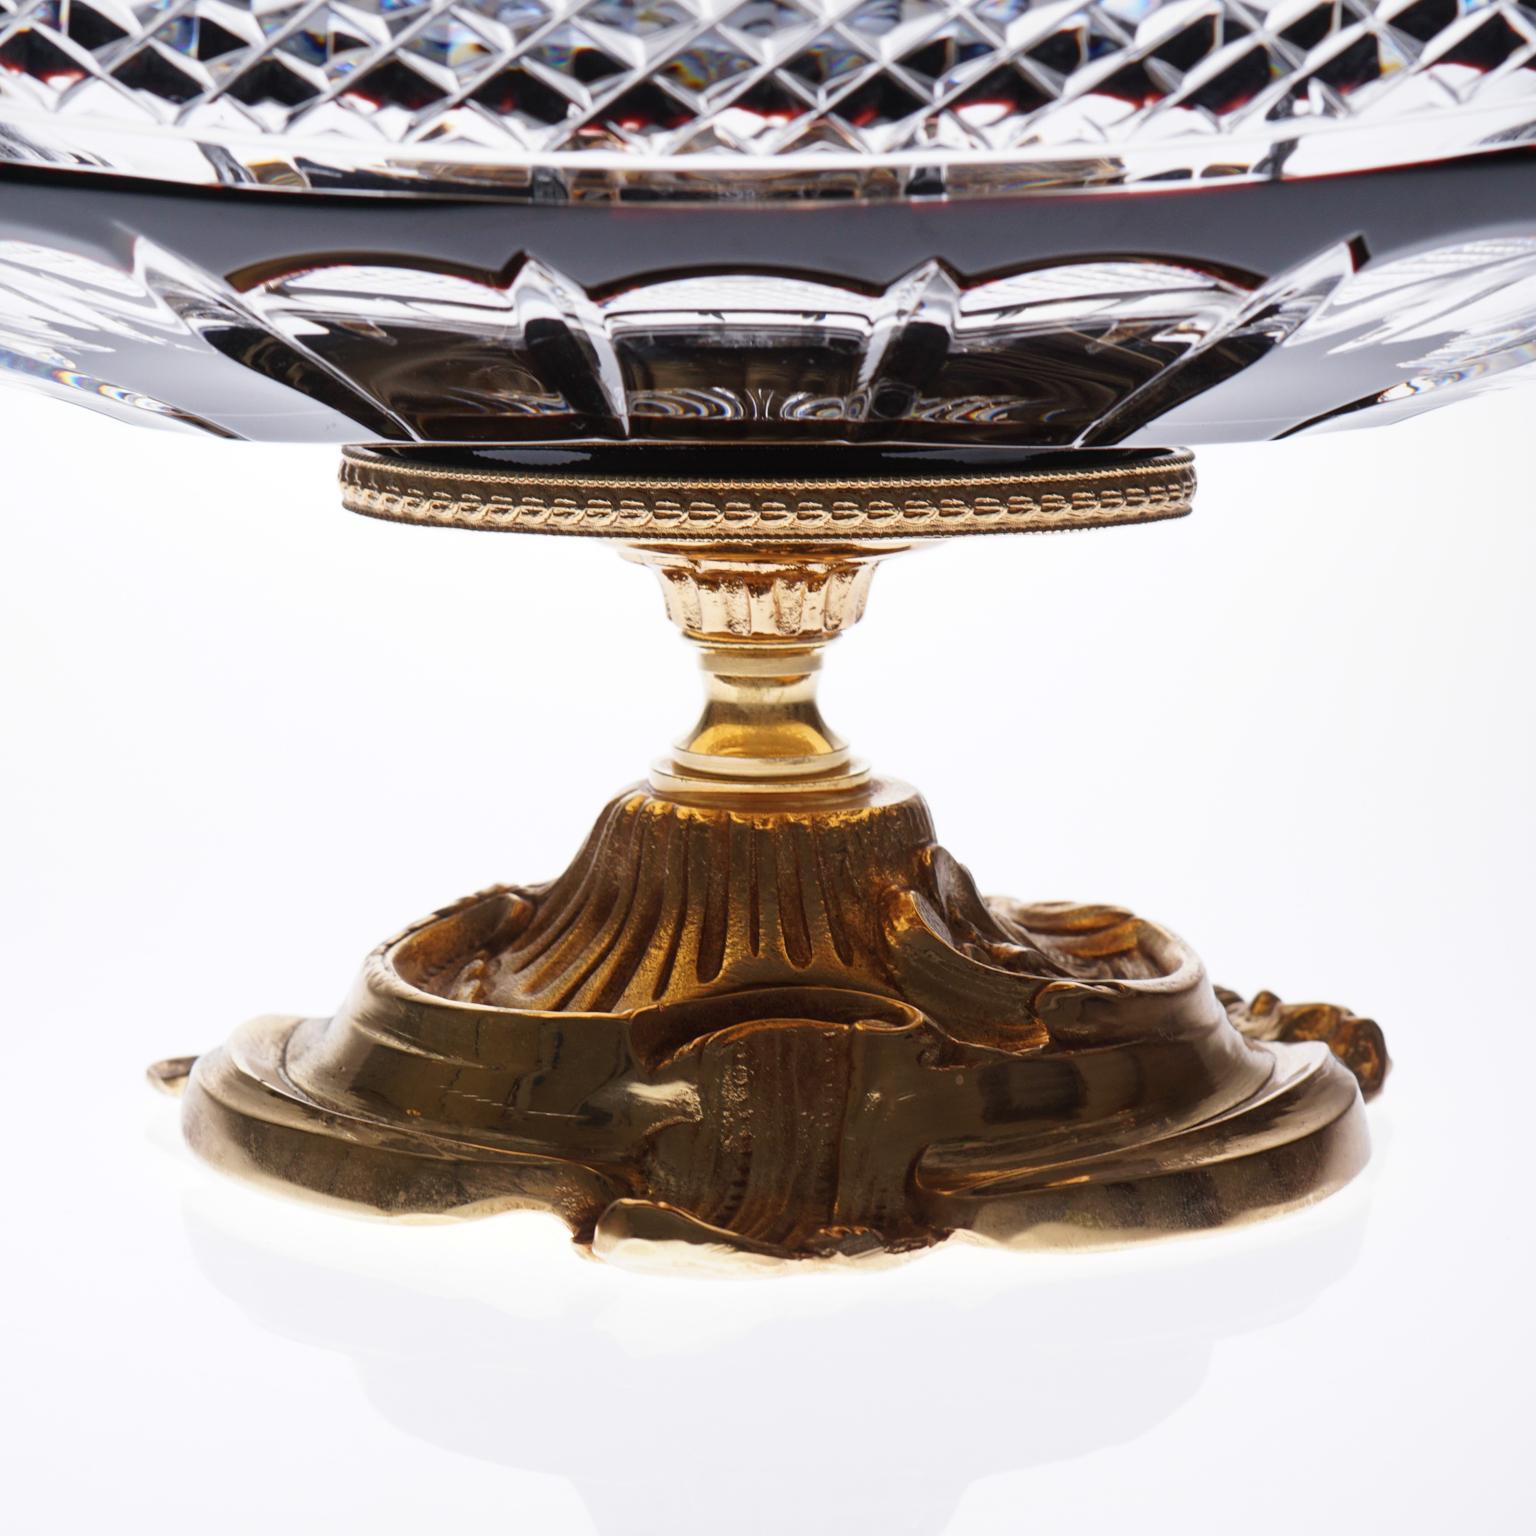 Other Dark Red Rrystal Jardinière with Bronze Covered 22-Carat Gold, Angel Detail For Sale